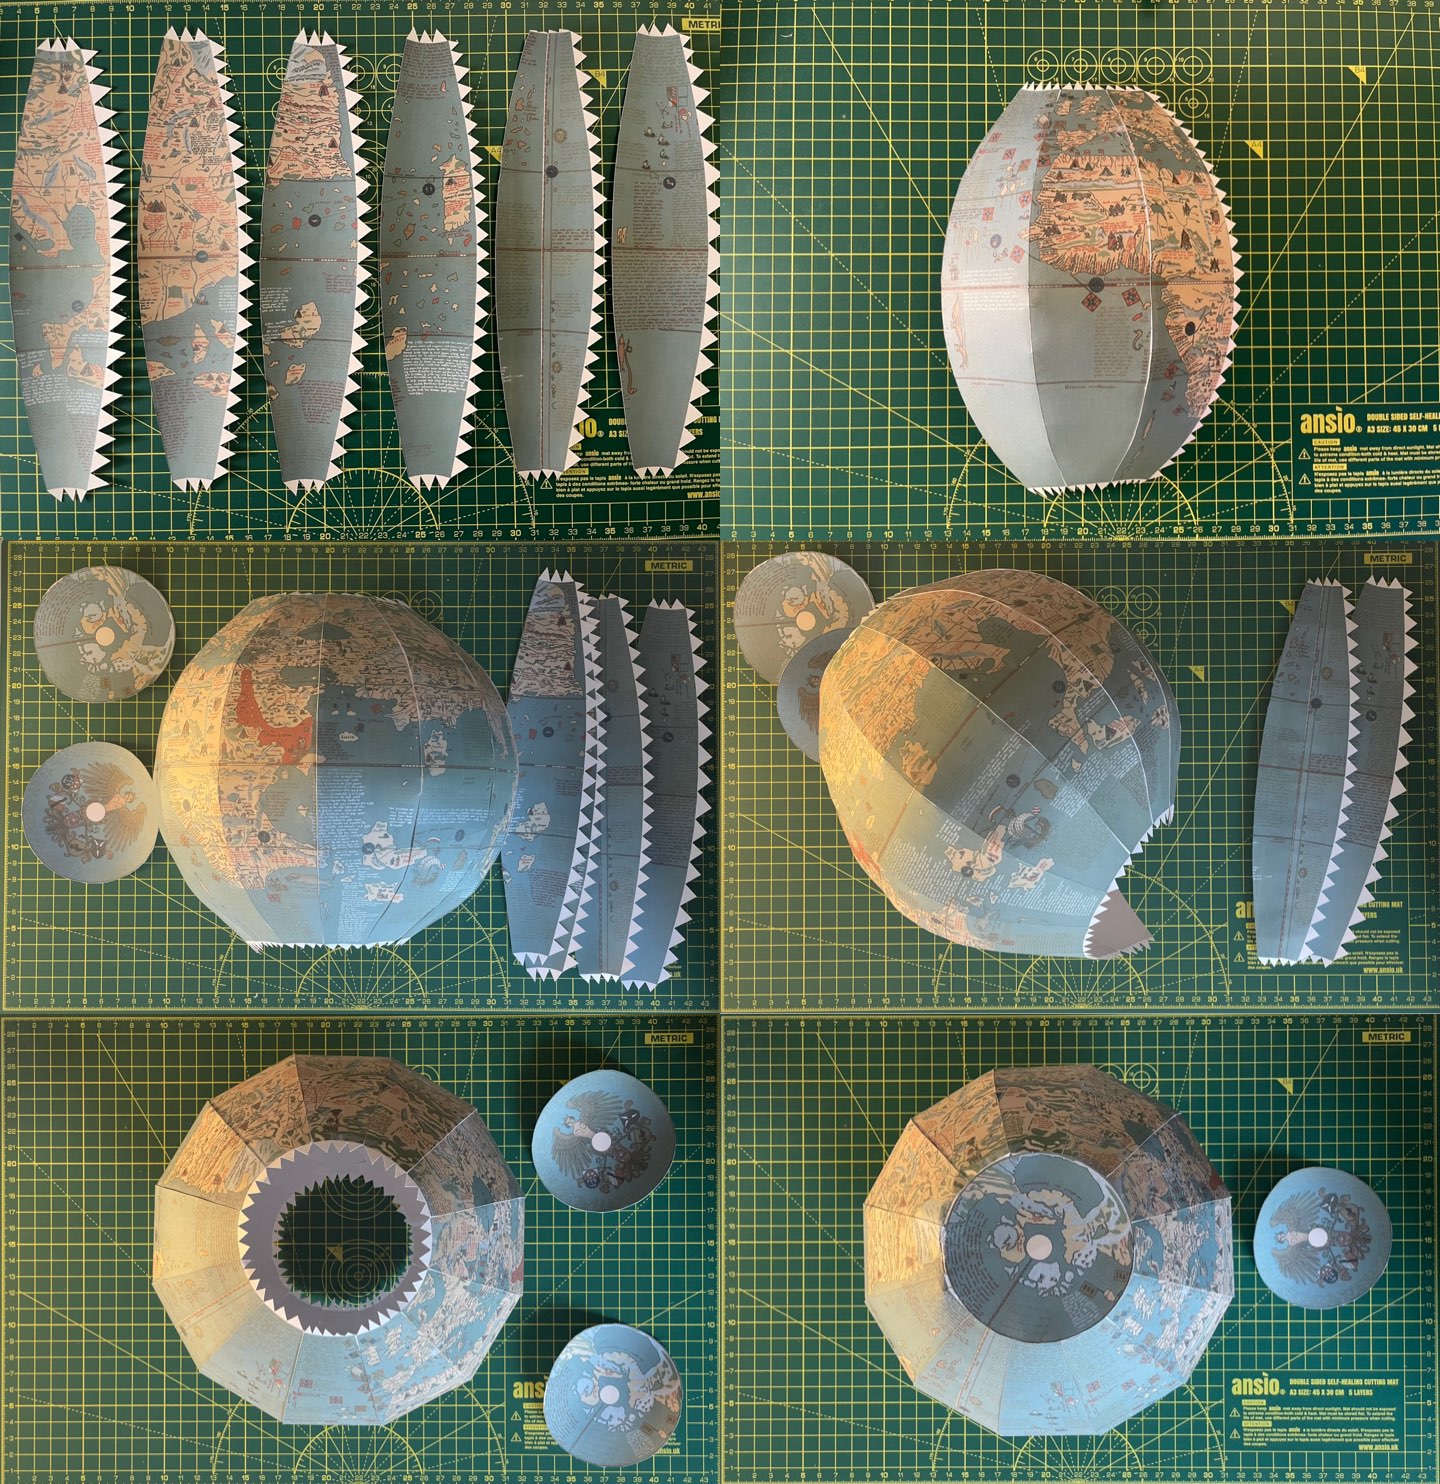 A sequence of 6 photos showing the paper globe being created. Tabs on each of the gores are glued together, with the calottes being added to the top at the end.